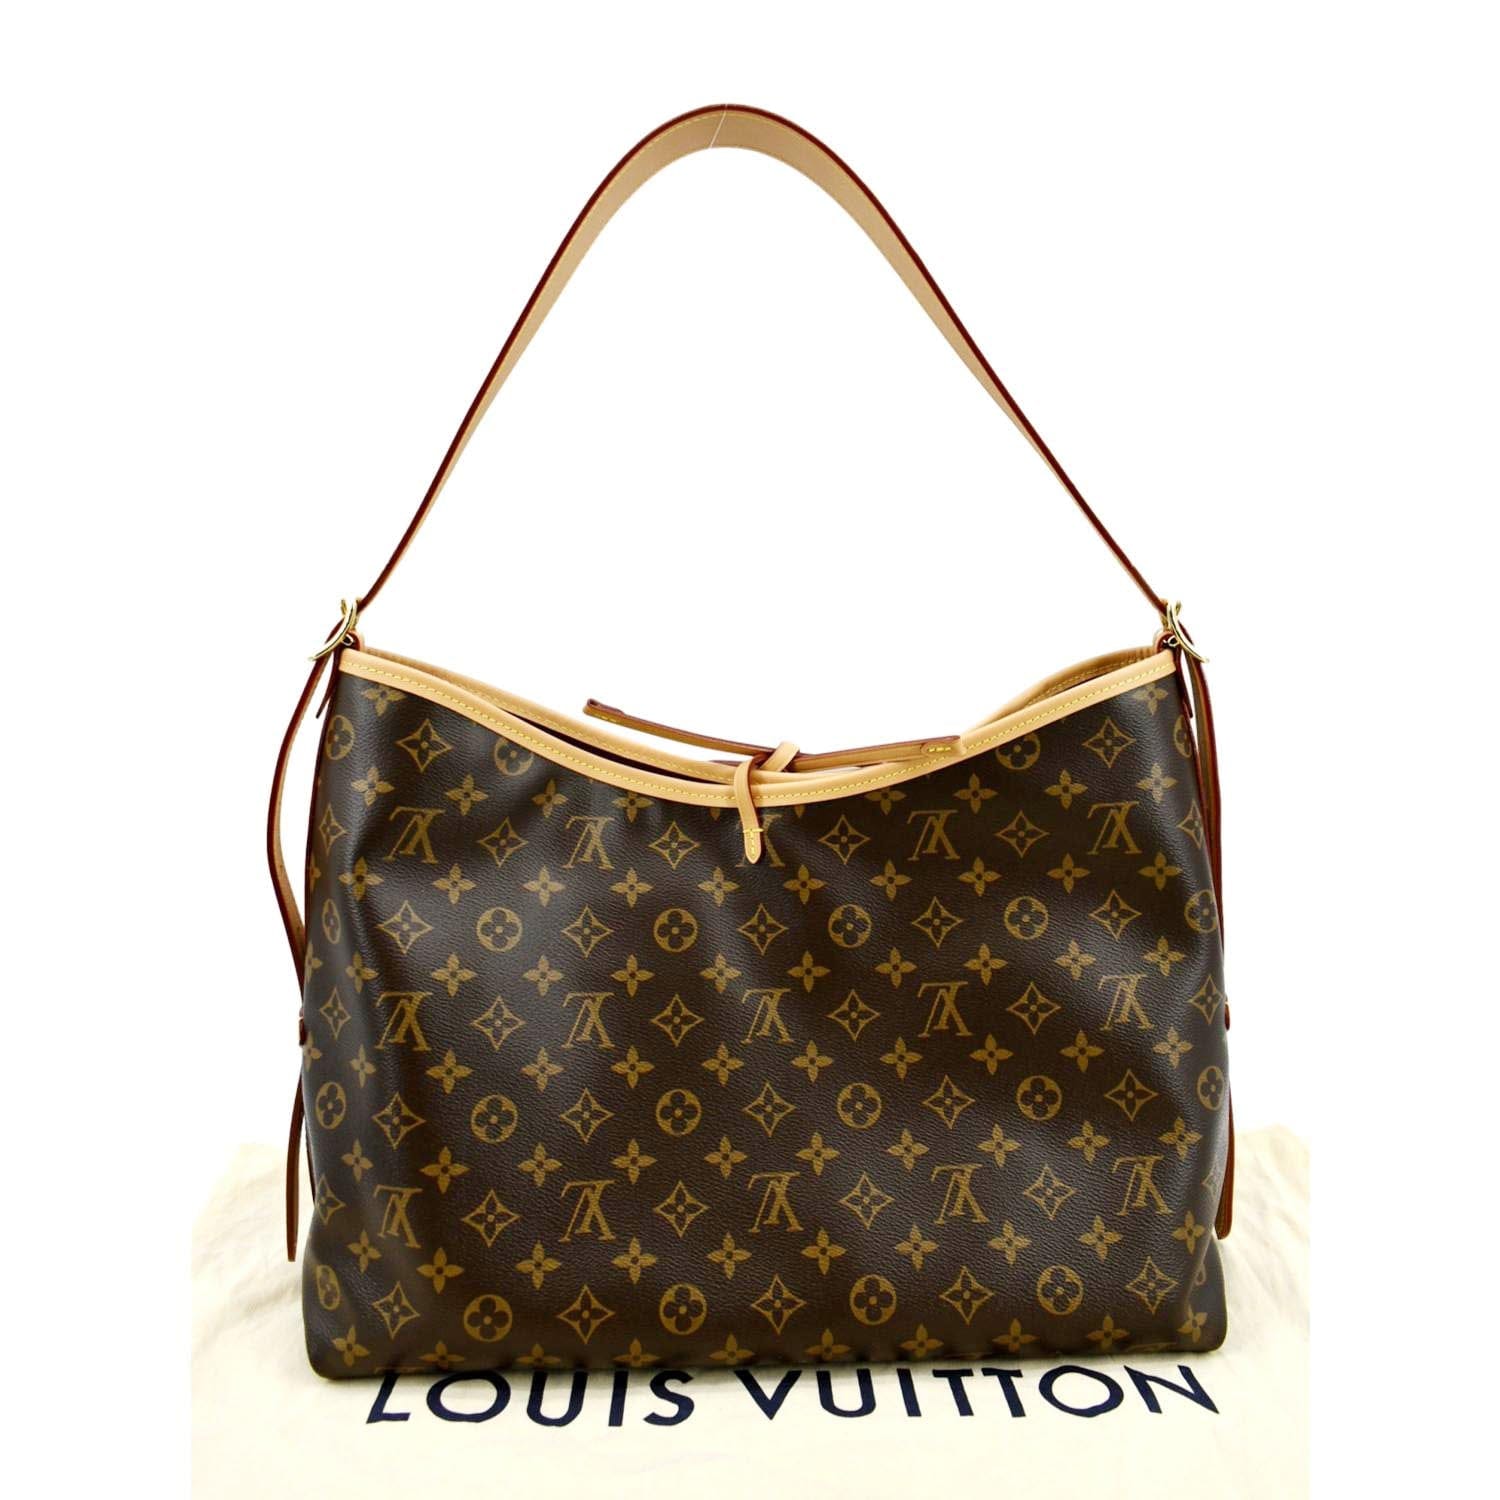 Louis Vuitton Carryall PM wristlet pouch only